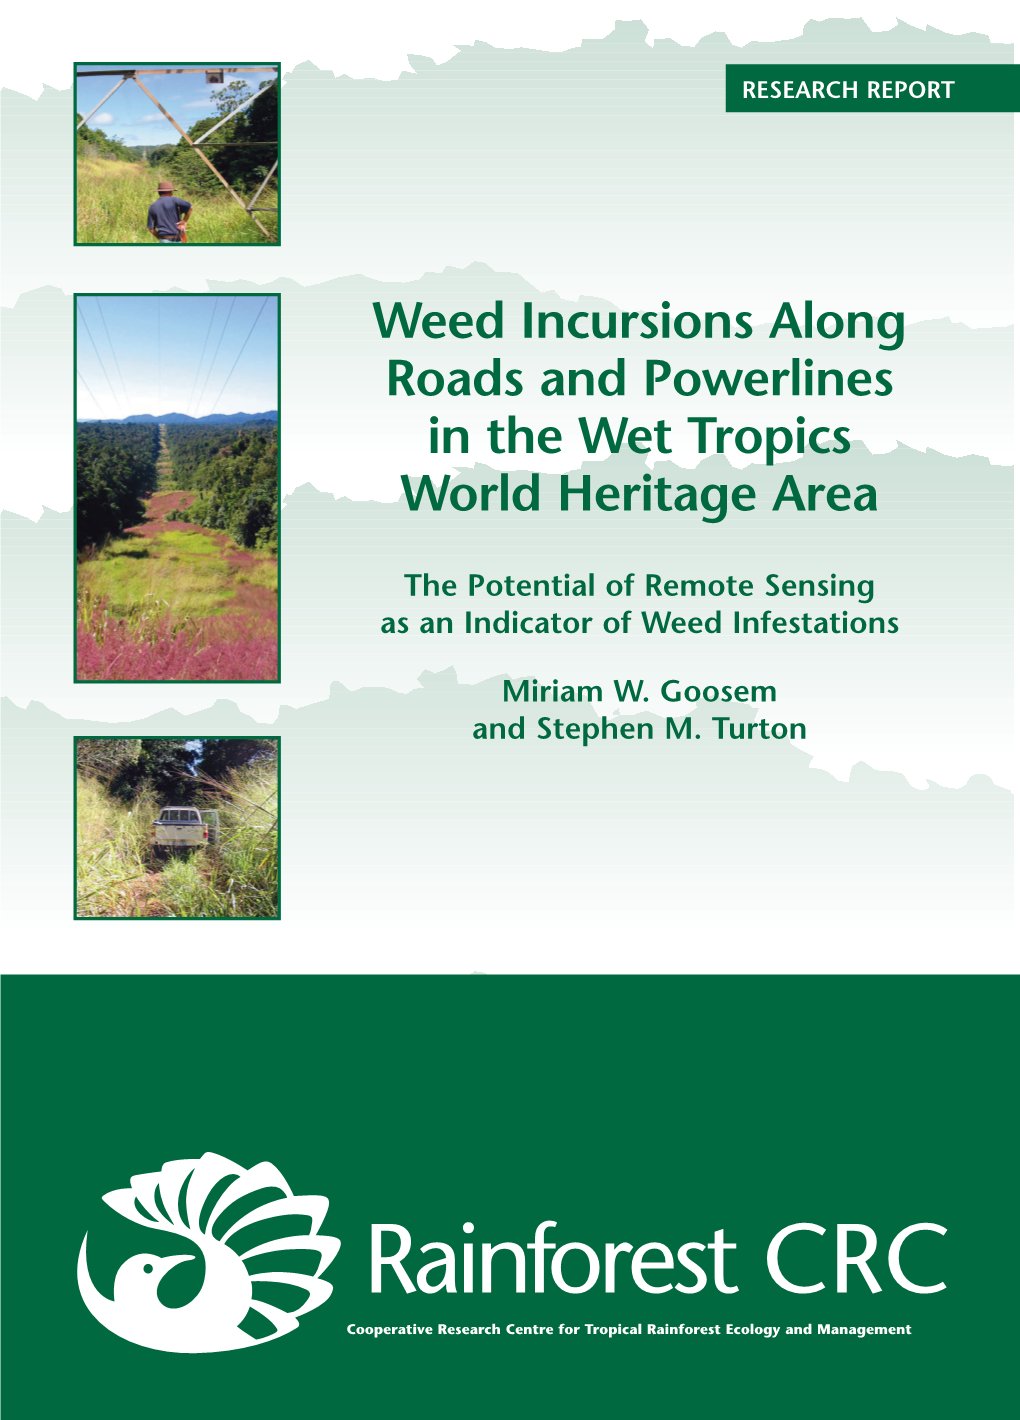 Weed Incursions Along Roads and Powerlines in the Wet Tropics RESEARCH REPORT